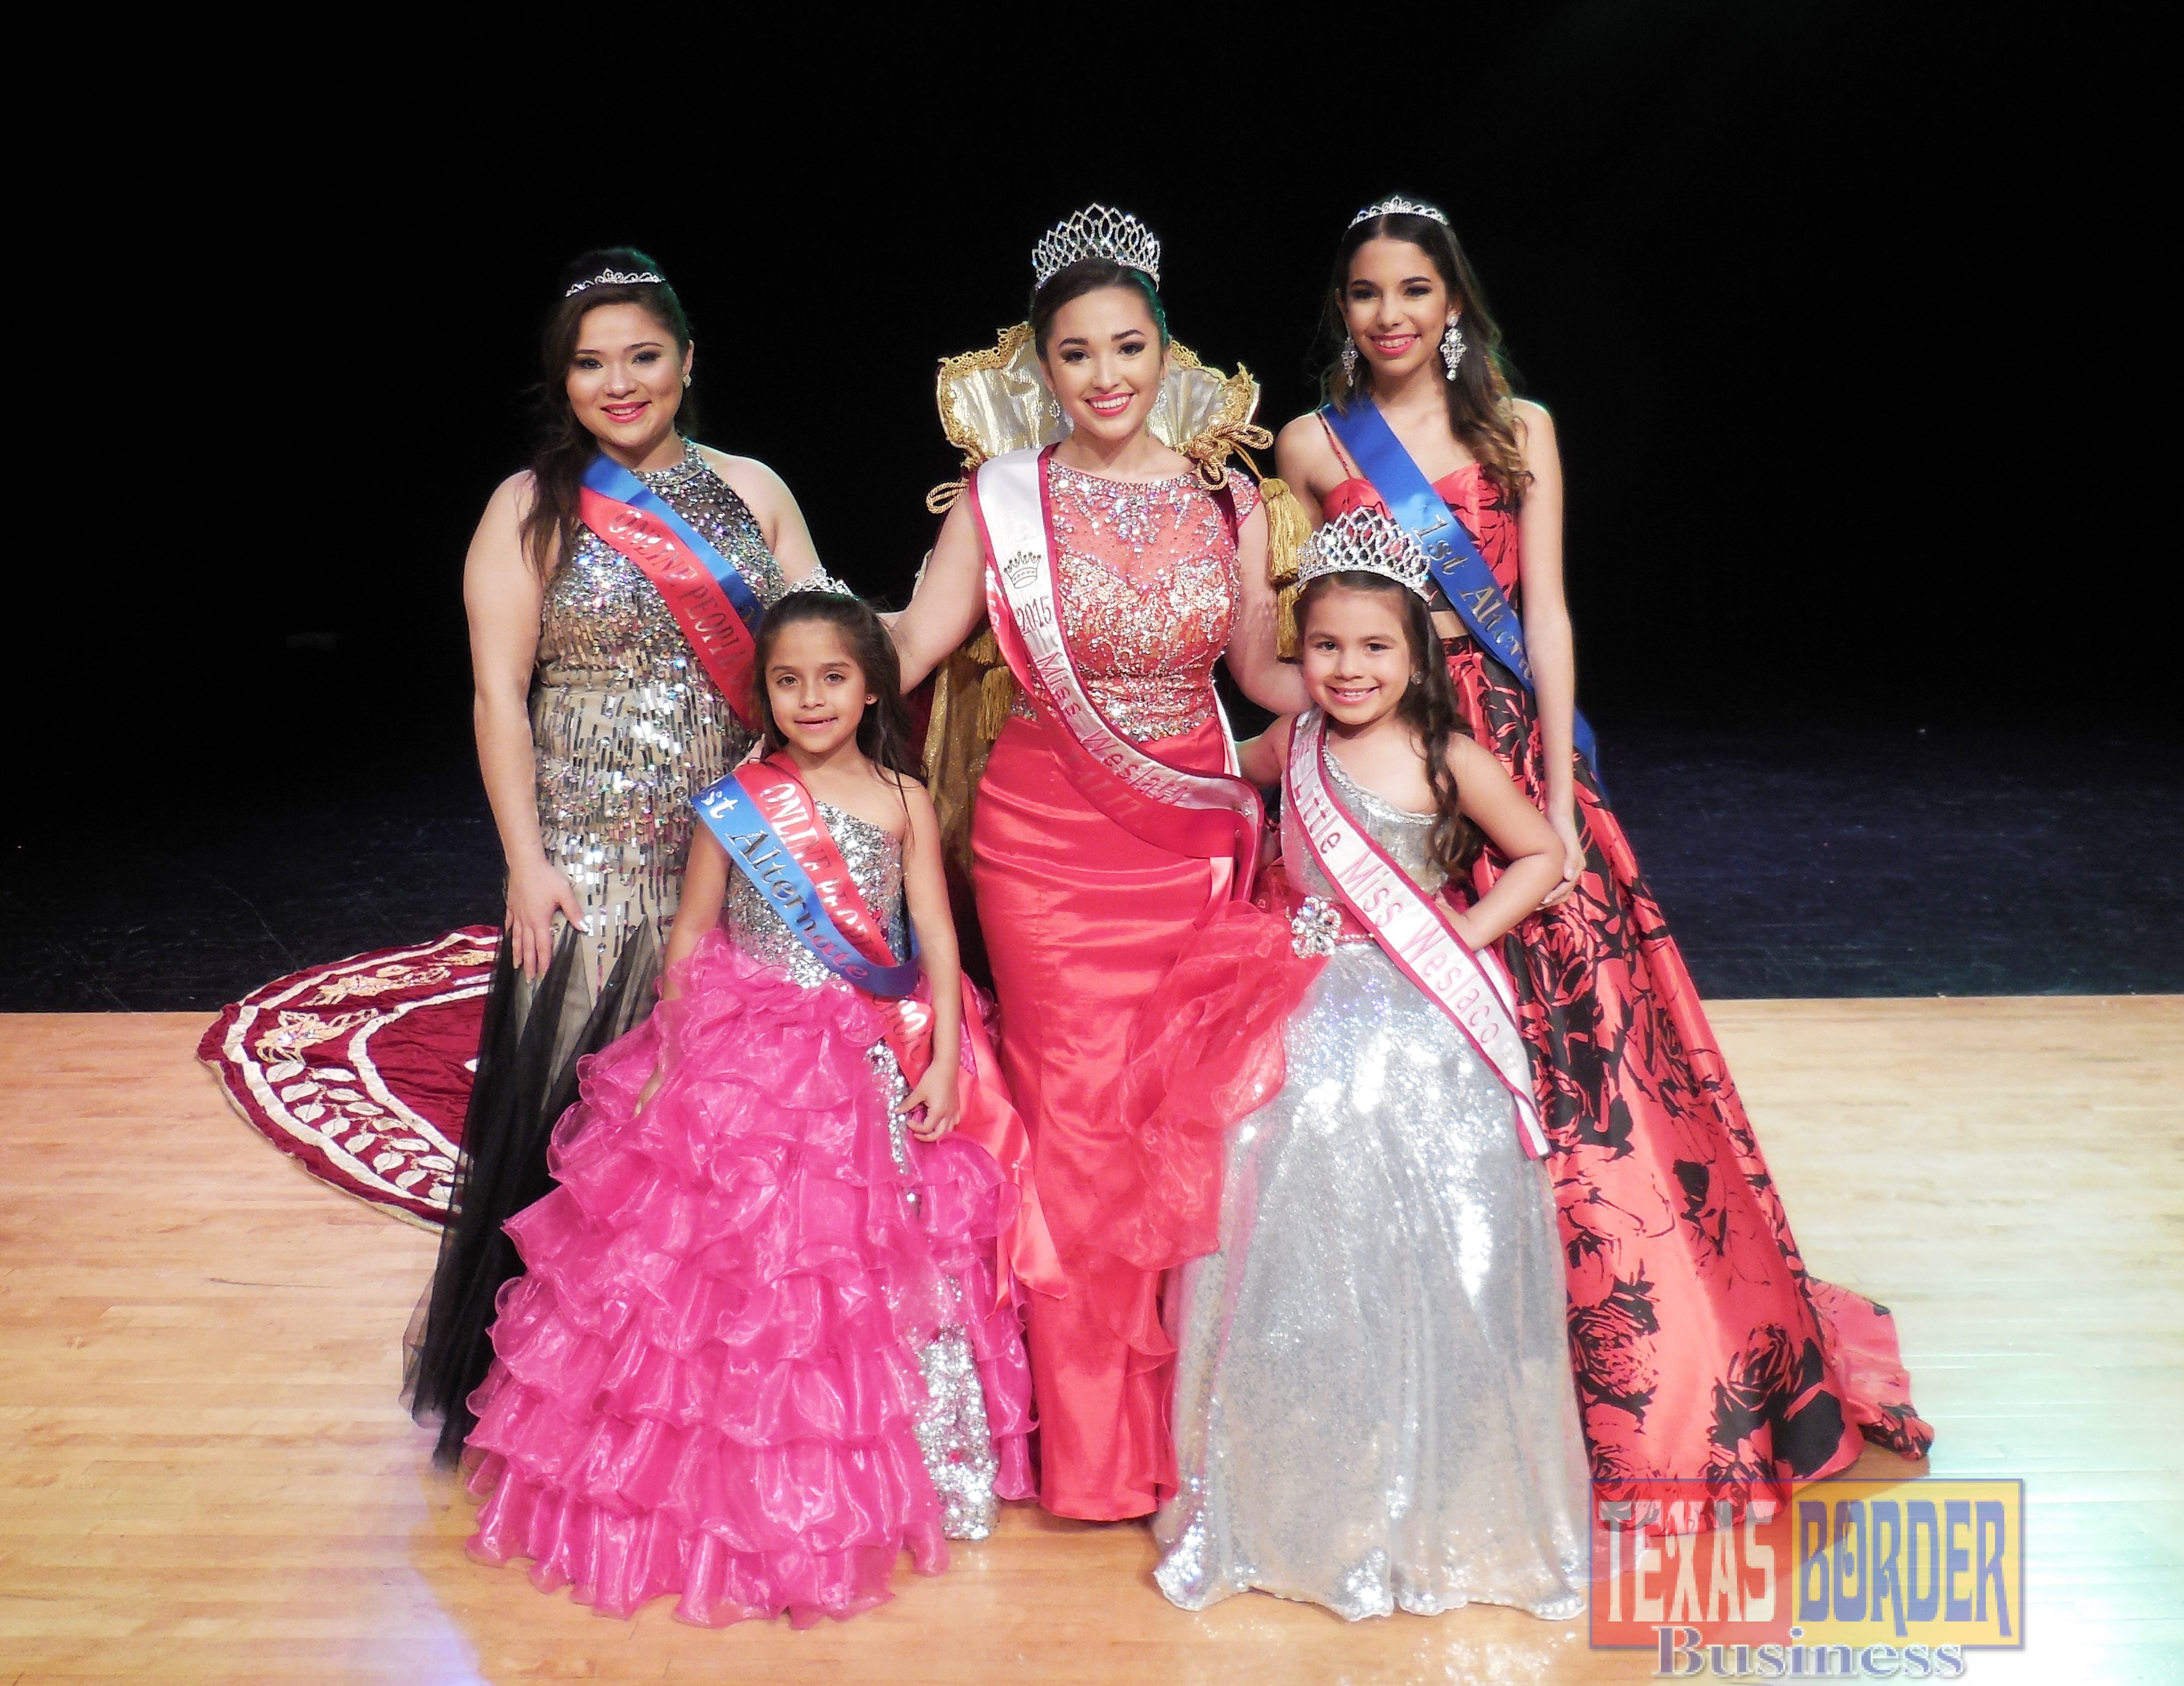 Pictured: (L-R) The 2015 Miss Onion Fest and Miss Weslaco courts.  This year’s pageants will be held on February 20 at the Weslaco ISD Performing Arts Center.